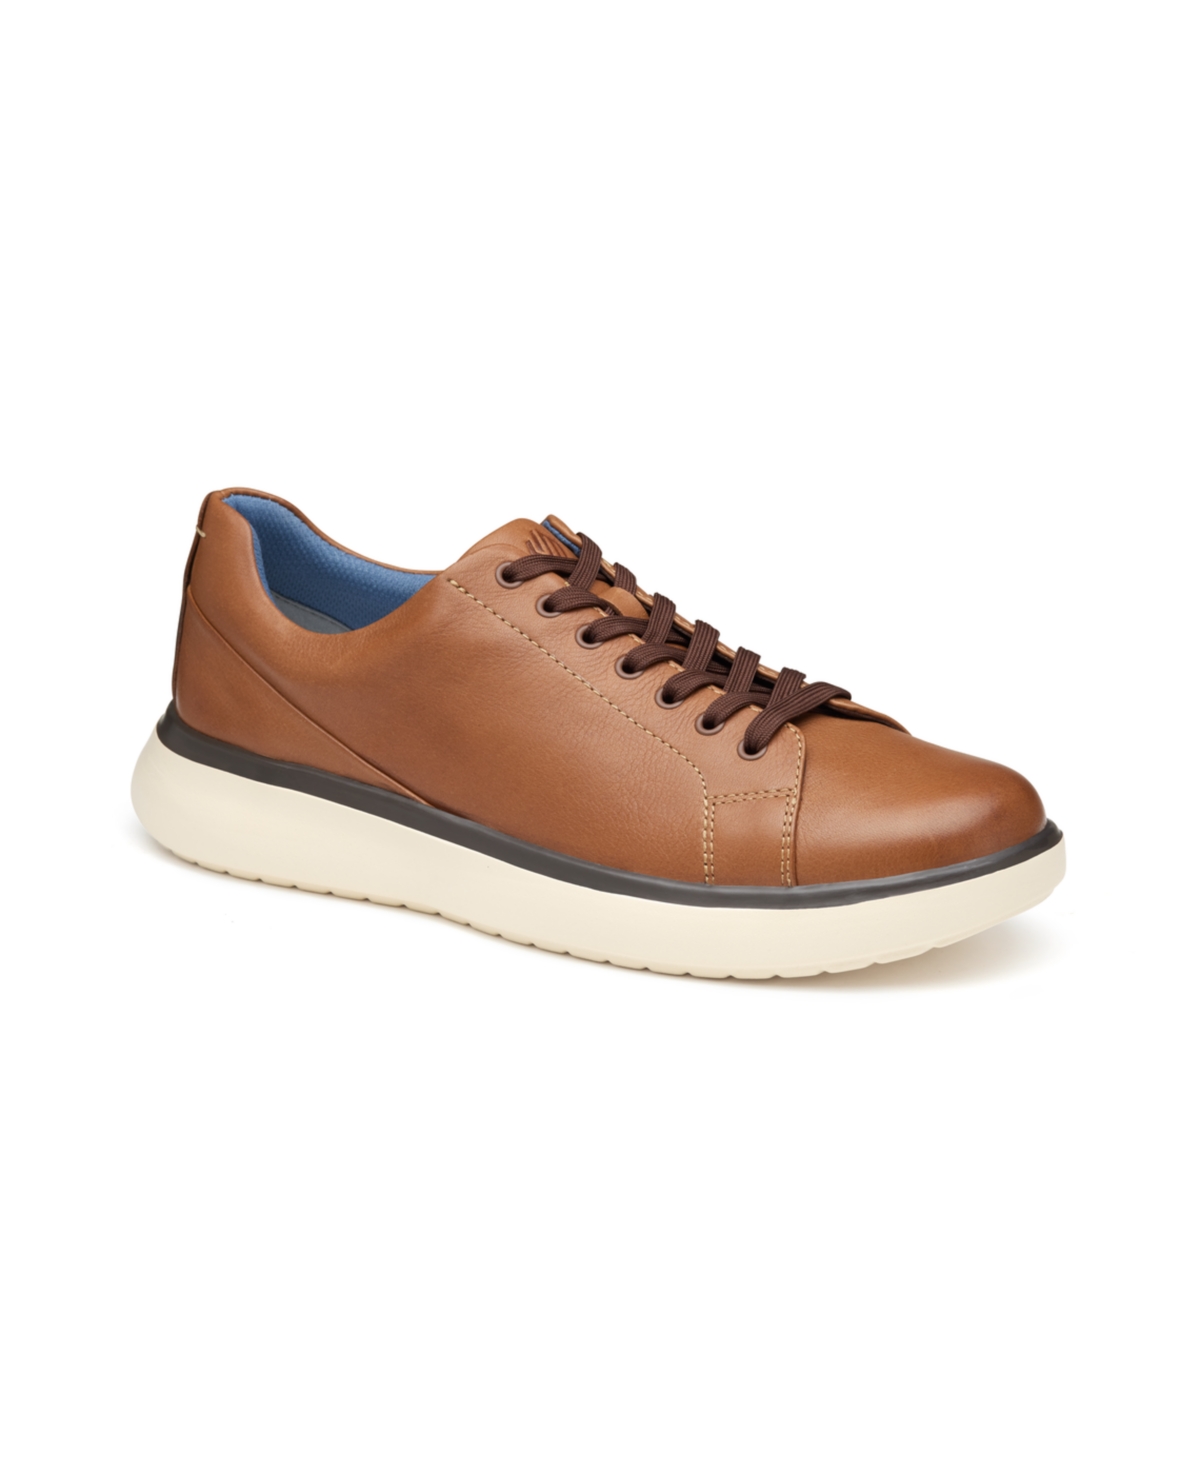 Men's Oasis Lace-To-Toe Sneakers - Tan